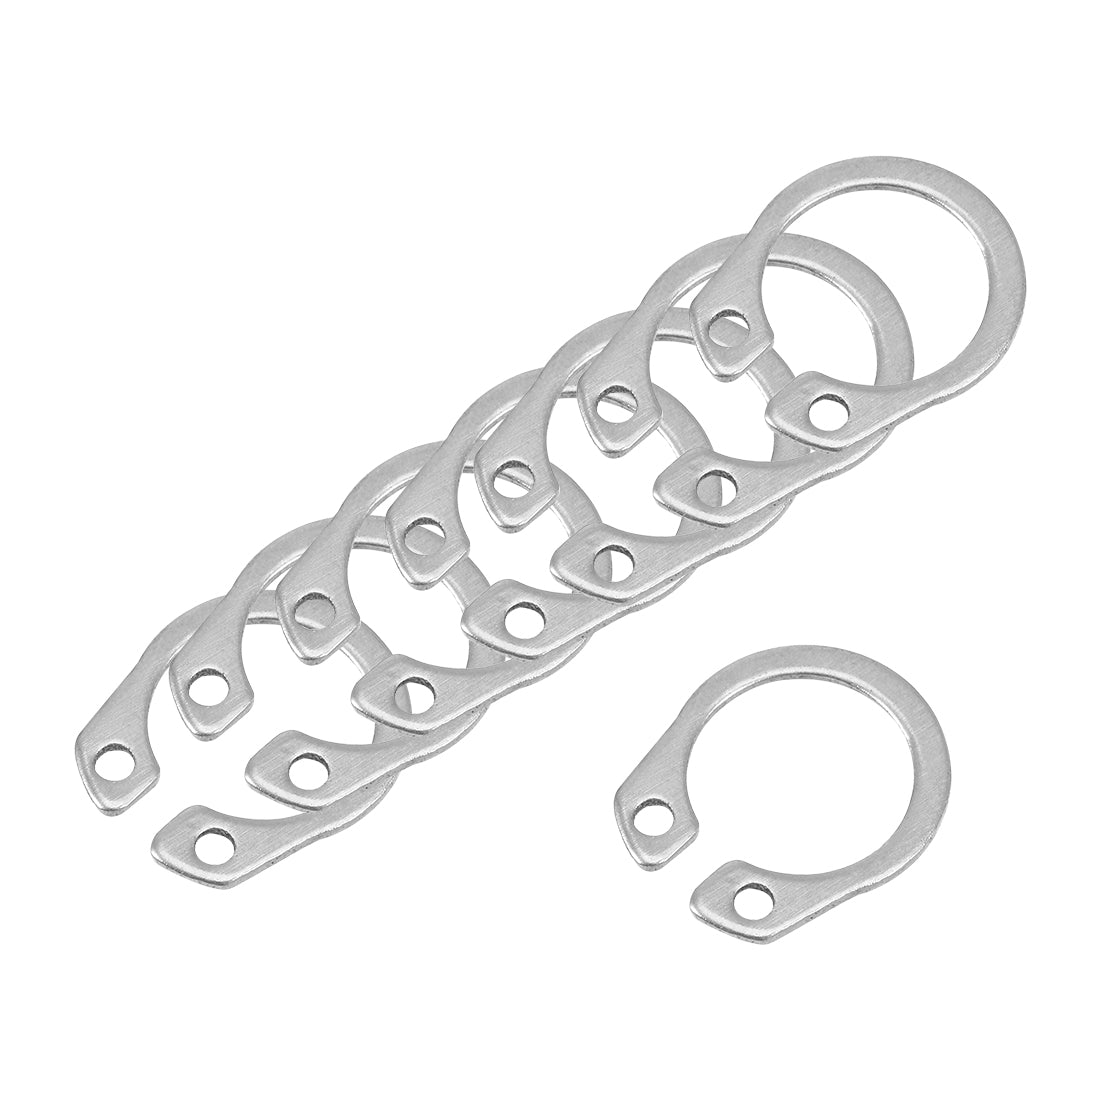 uxcell Uxcell 12.8mm External Circlips Retaining Shaft Snap Rings 304 Stainless Steel 100pcs